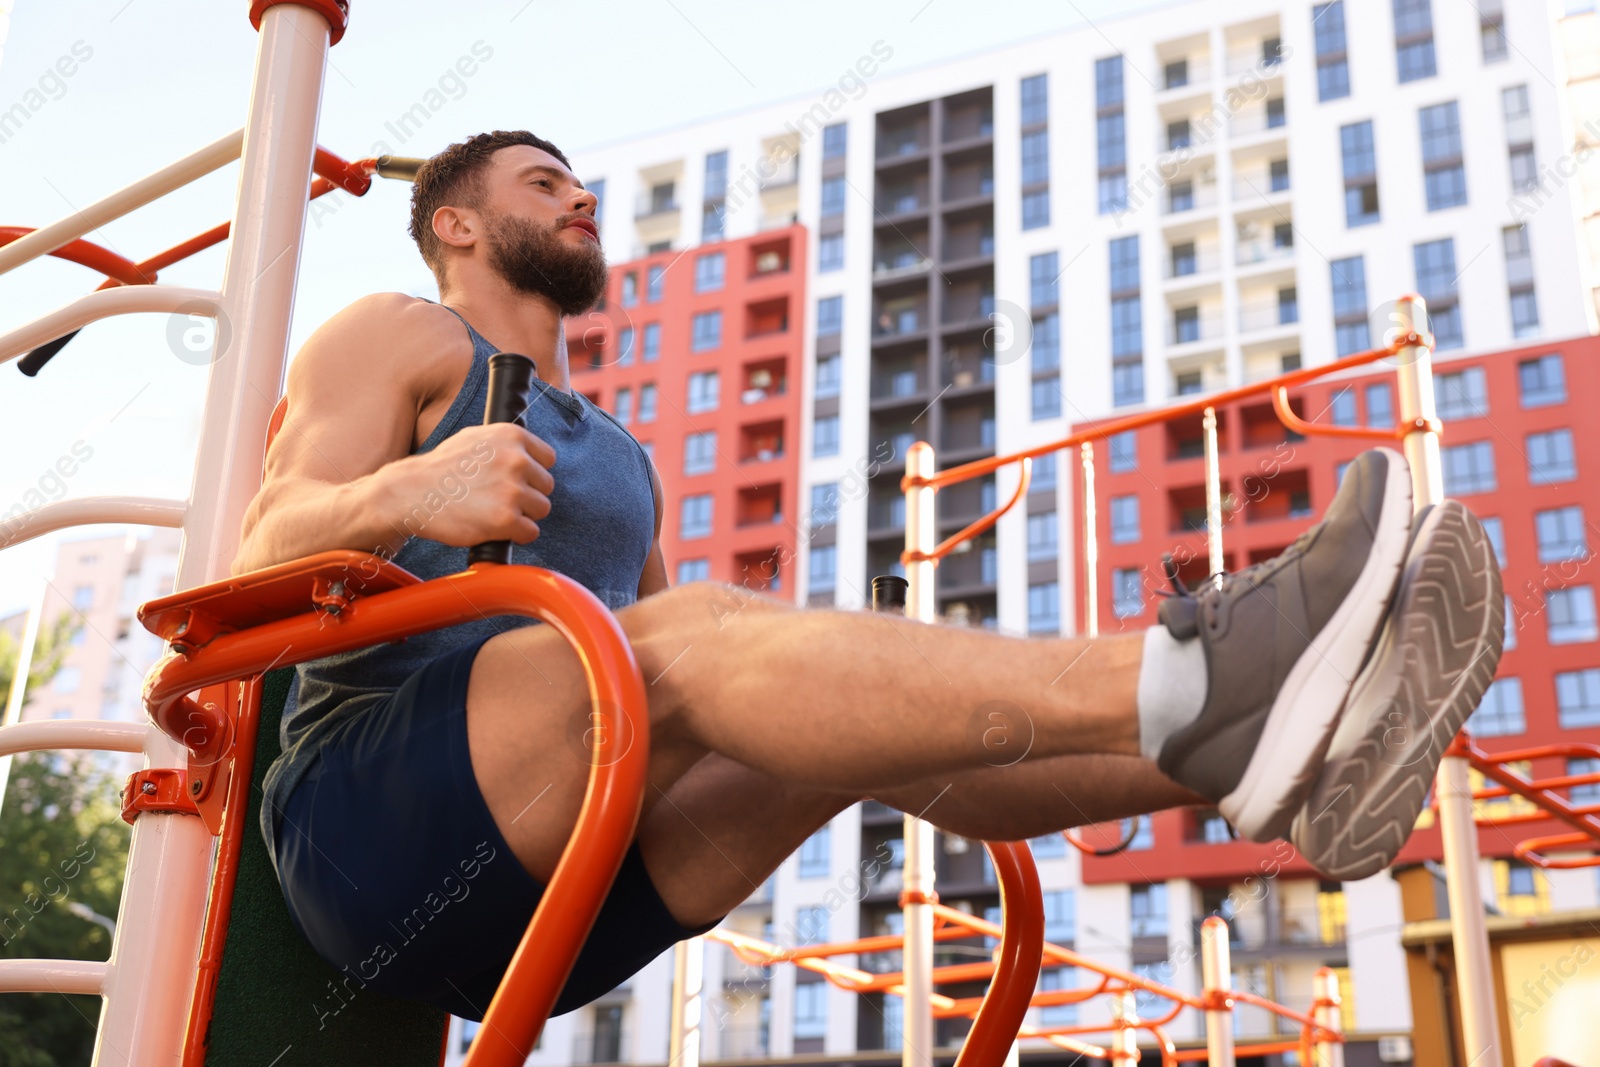 Photo of Man training on abs station, low angle view. Outdoor gym